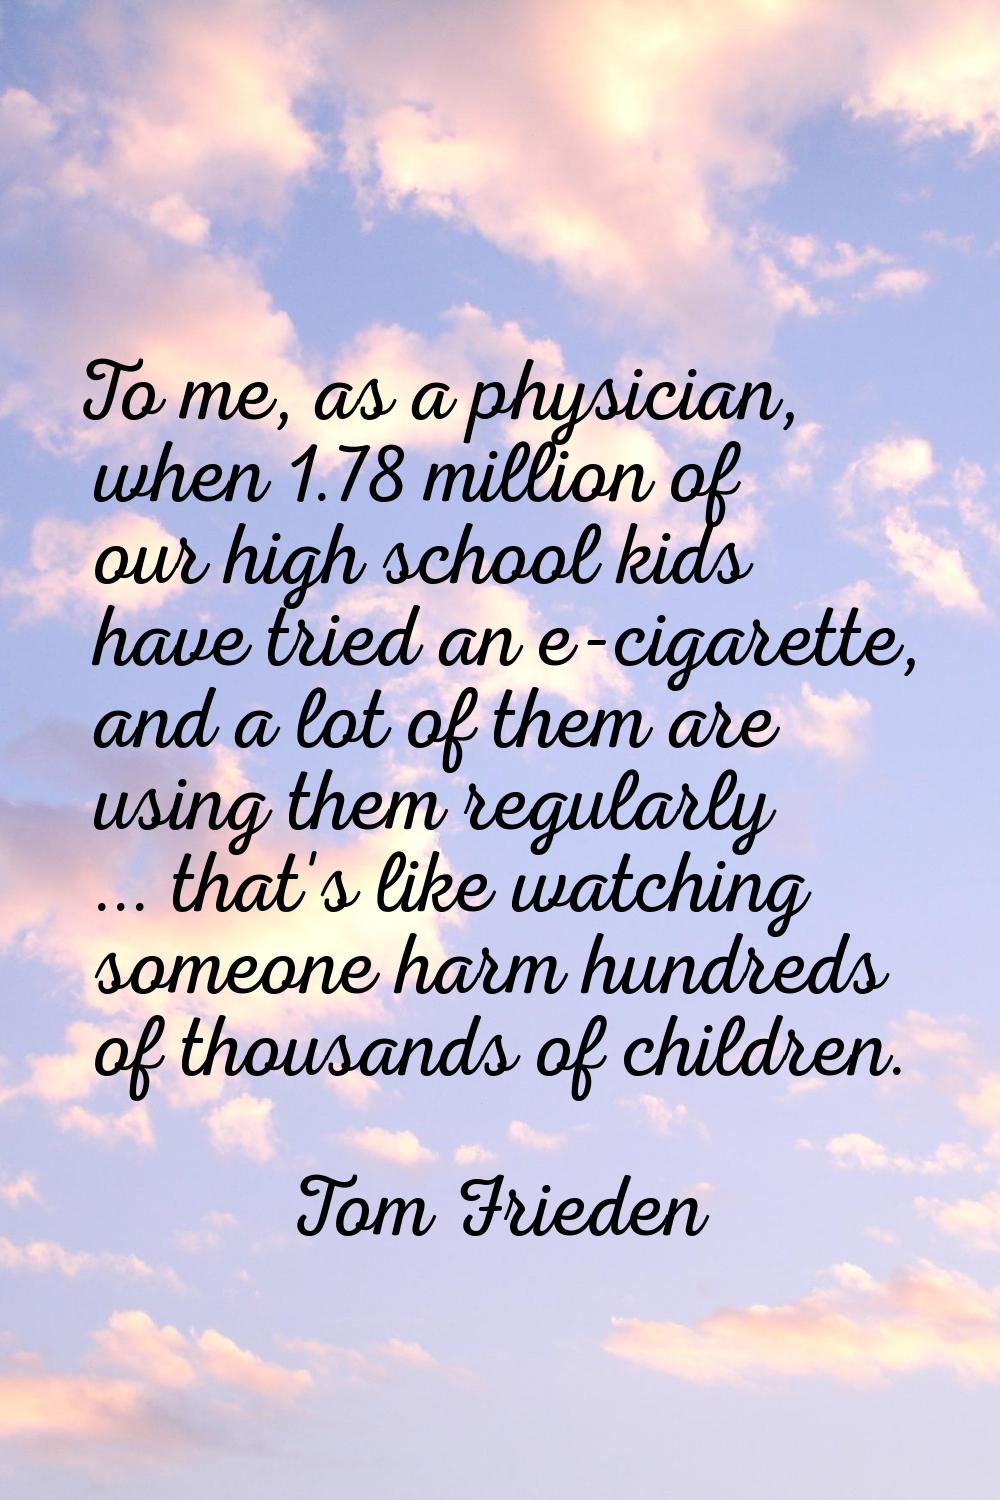 To me, as a physician, when 1.78 million of our high school kids have tried an e-cigarette, and a l